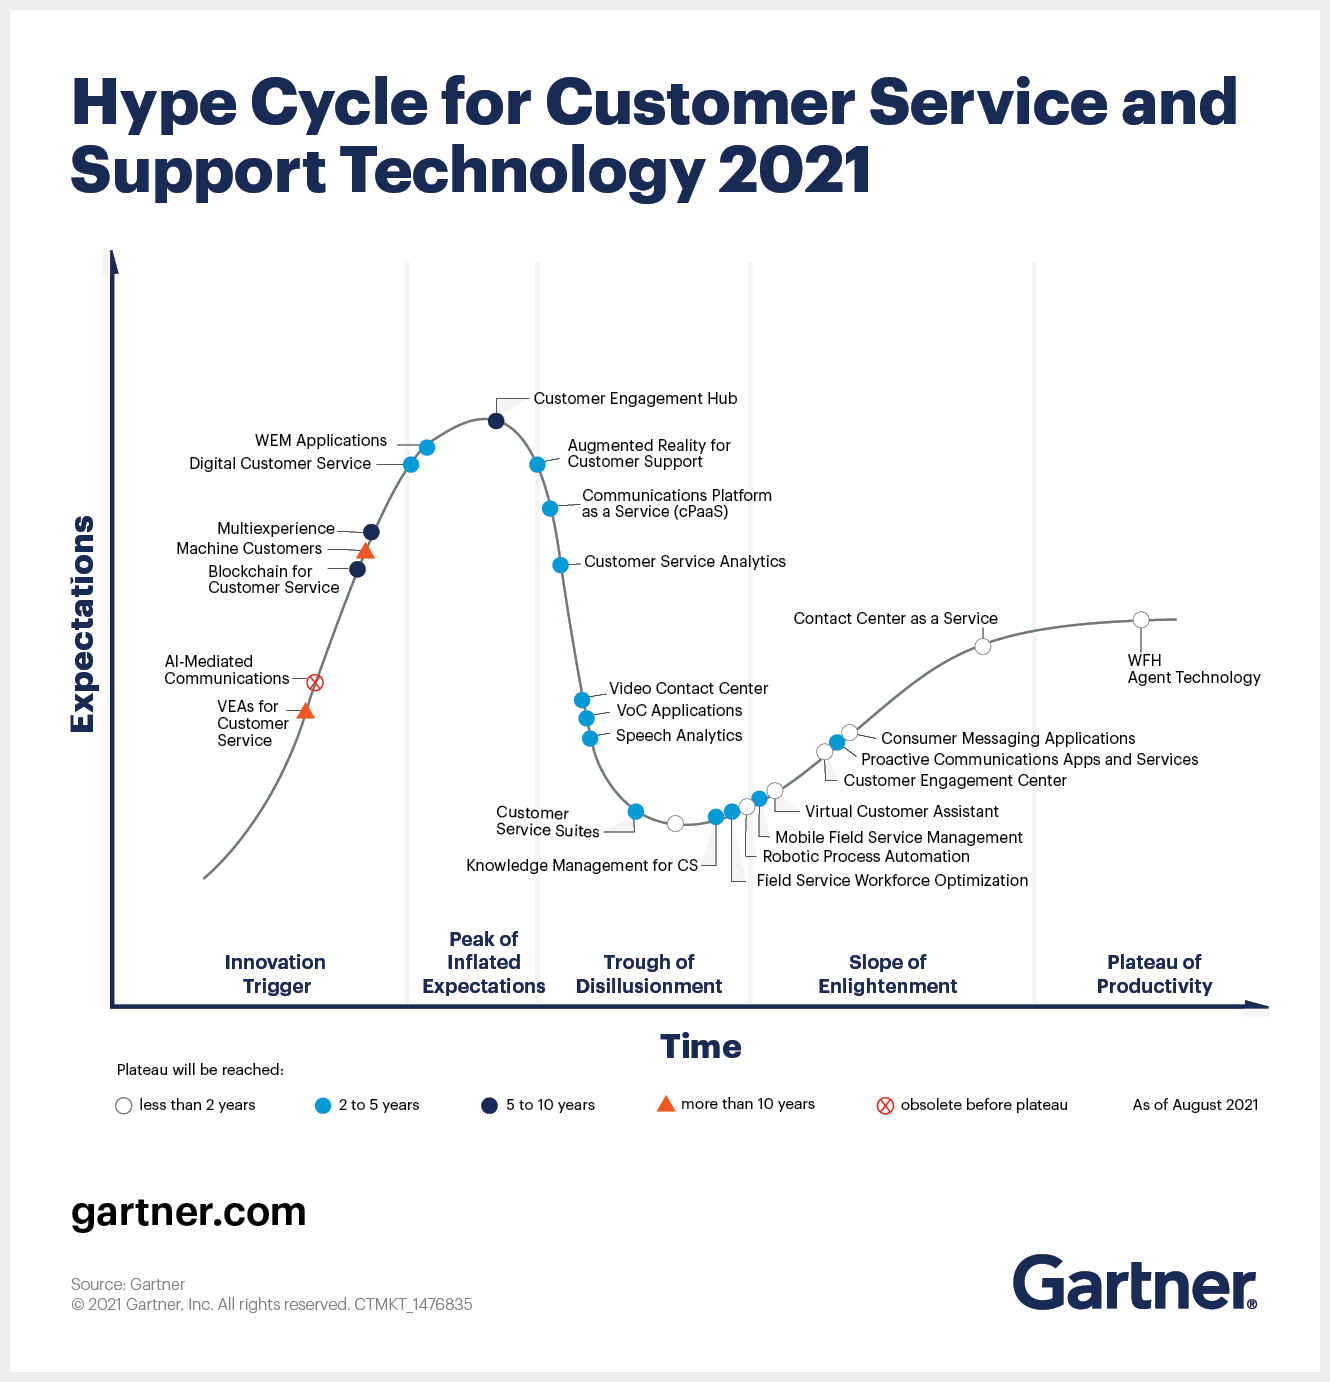 ioFGartner@Hype Cycle for Customer Service and Support Technology 2021j